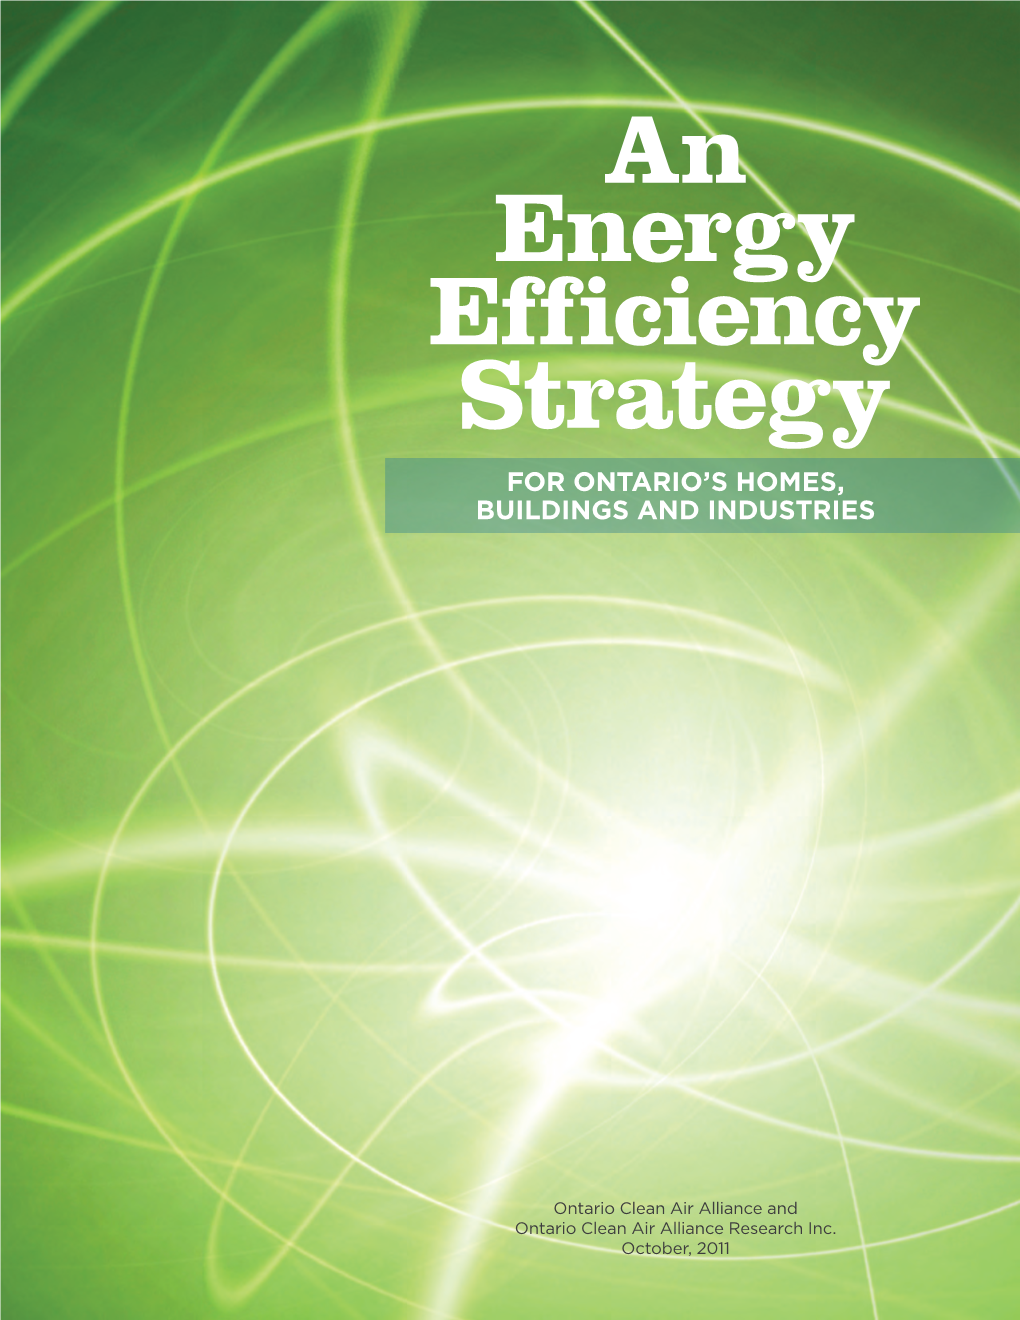 An Energy Efficiency Strategy for ONTARIO’S HOMES, BUILDINGS and INDUSTRIES